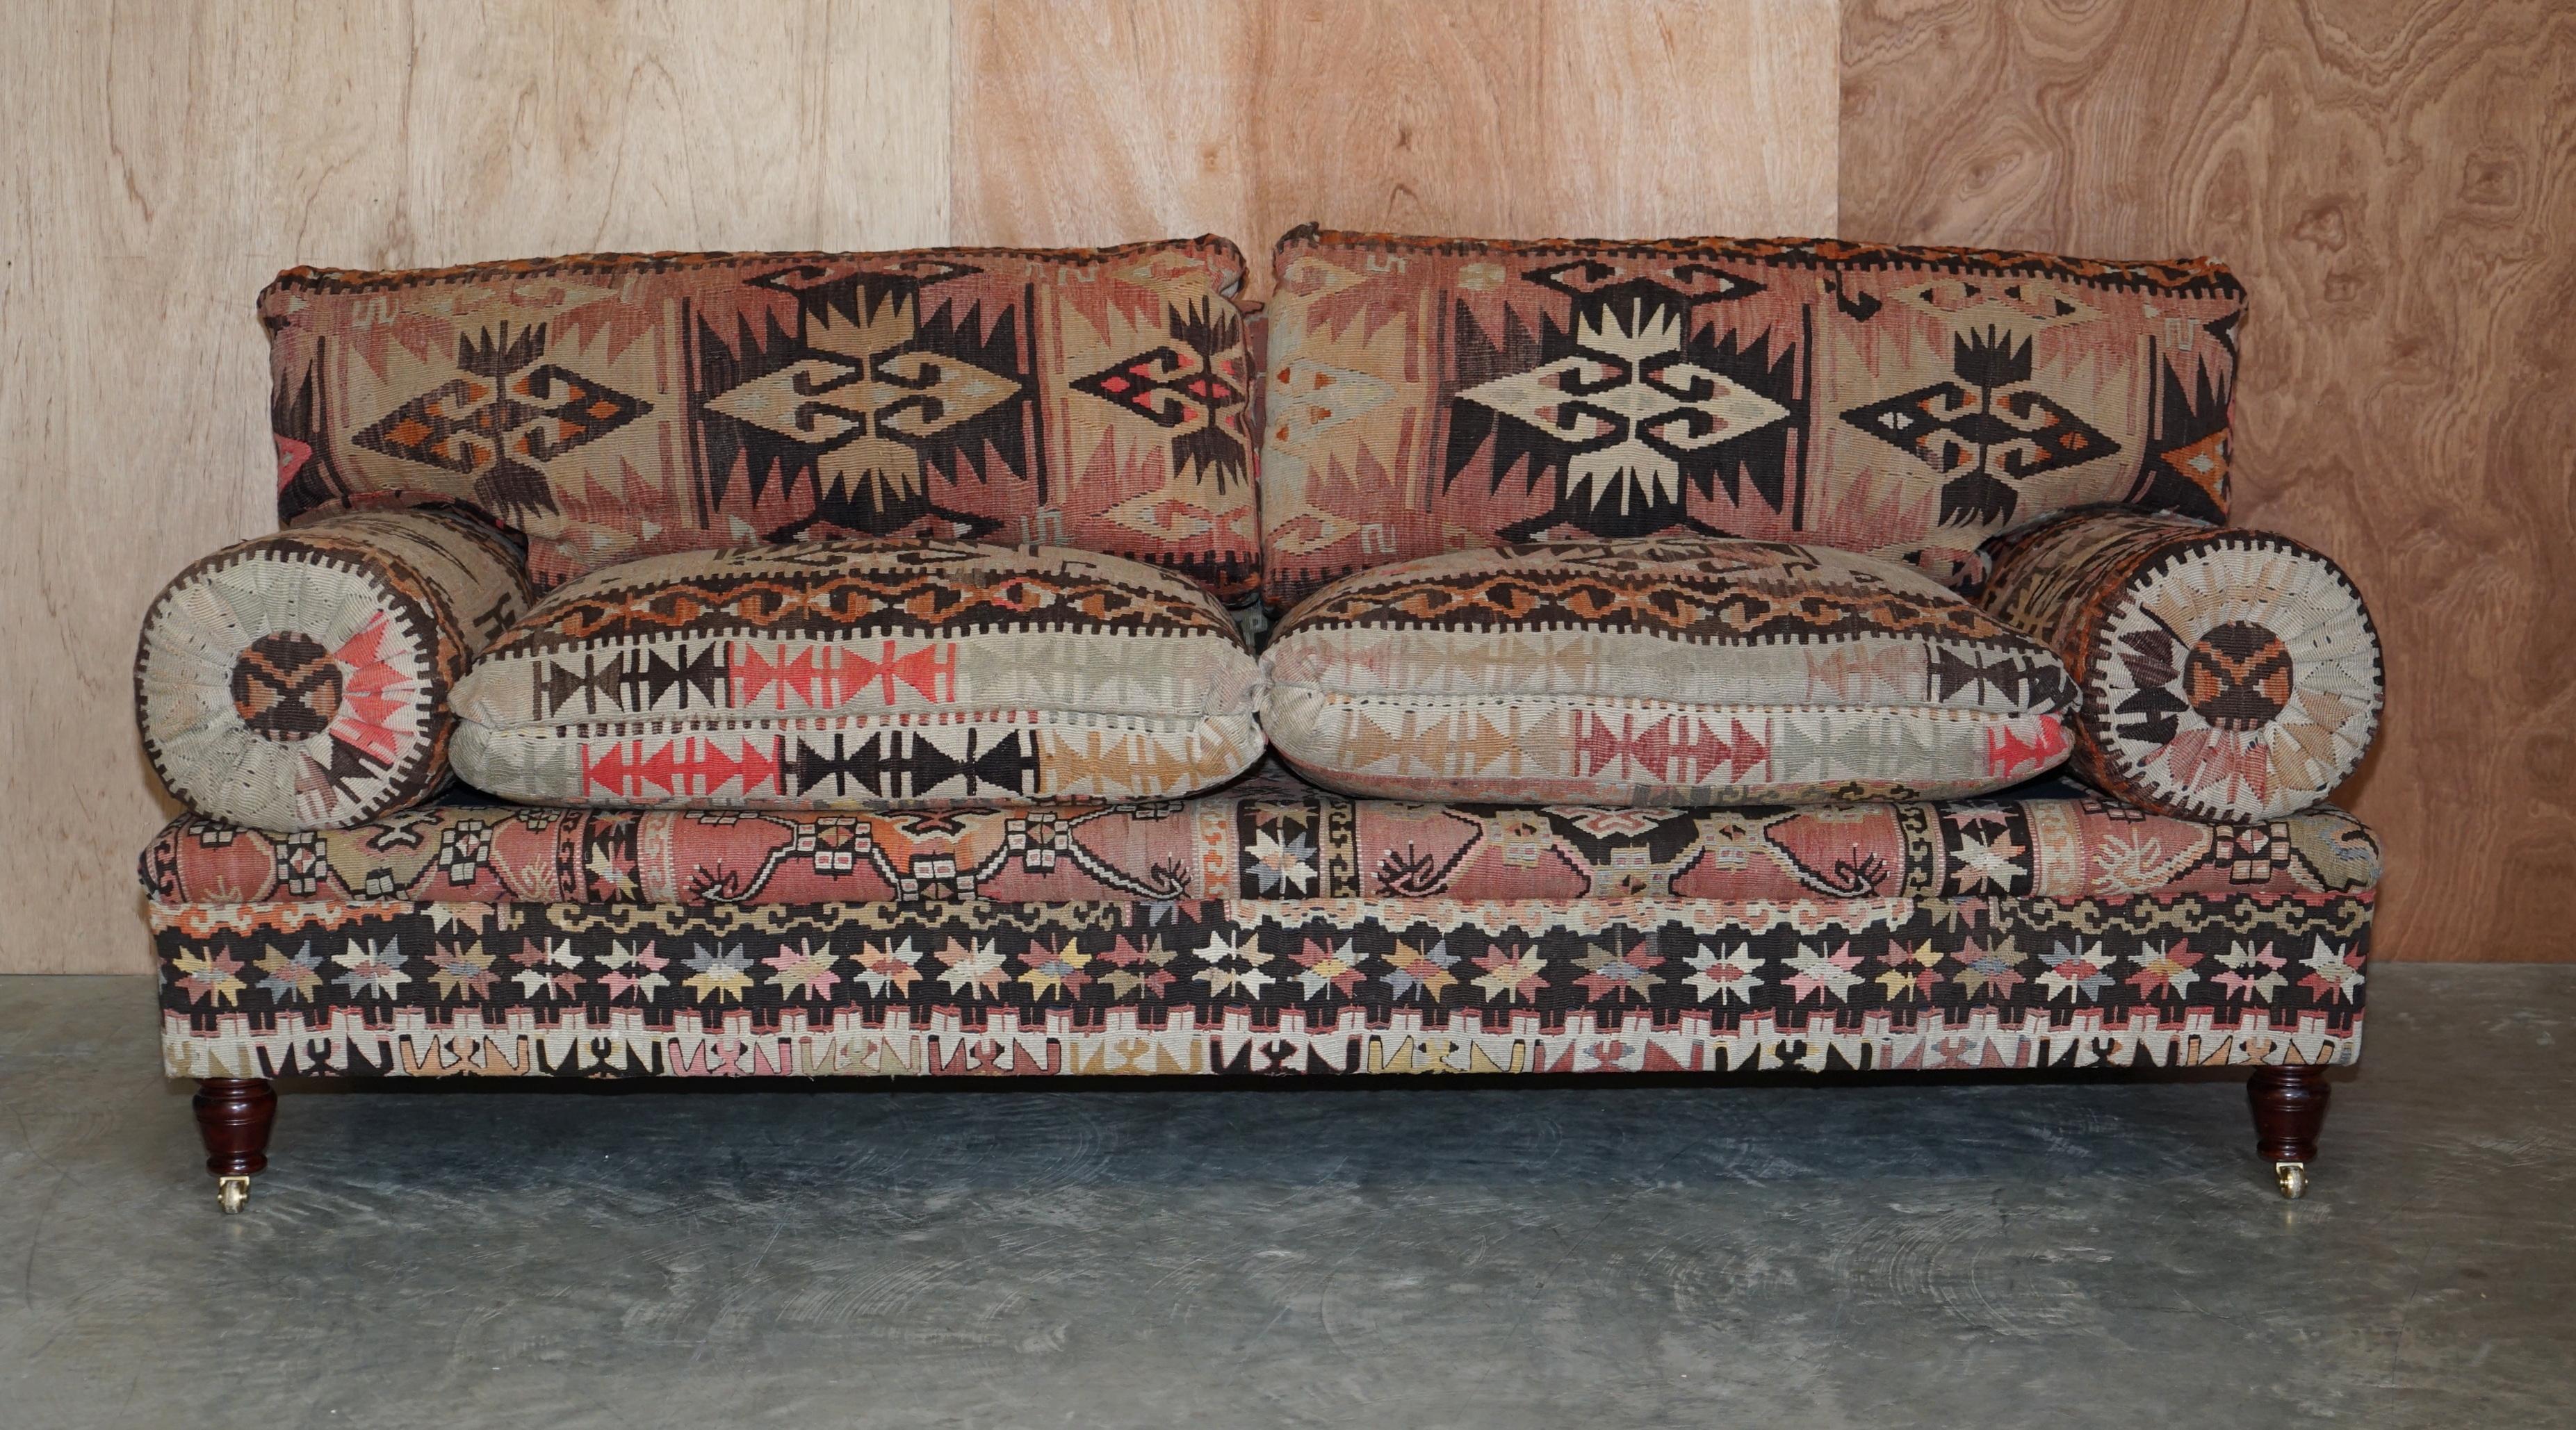 We are delighted to offer this sublime and highly collectable (part of a suite) New Old Stock George Smith Bulster or Bluster arm sofa upholstered with Aztec Kilim and finished with oversized feather filled cushions. 

This sofa is as mentioned